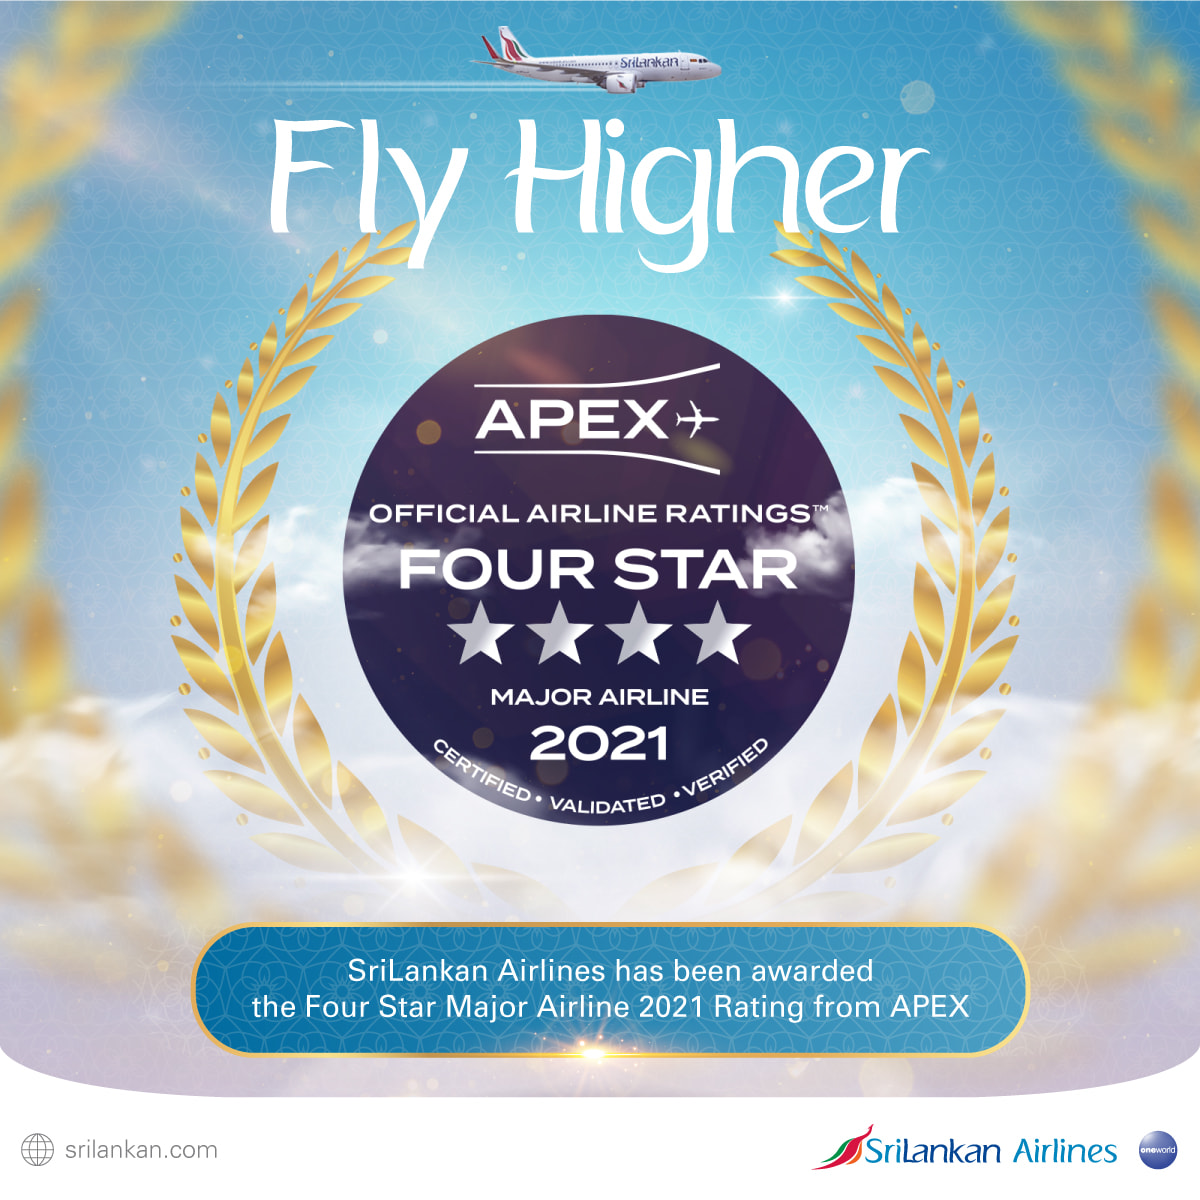 SriLankan Airlines is honoured to receive the Four Star Major Airline 2021 Rating 